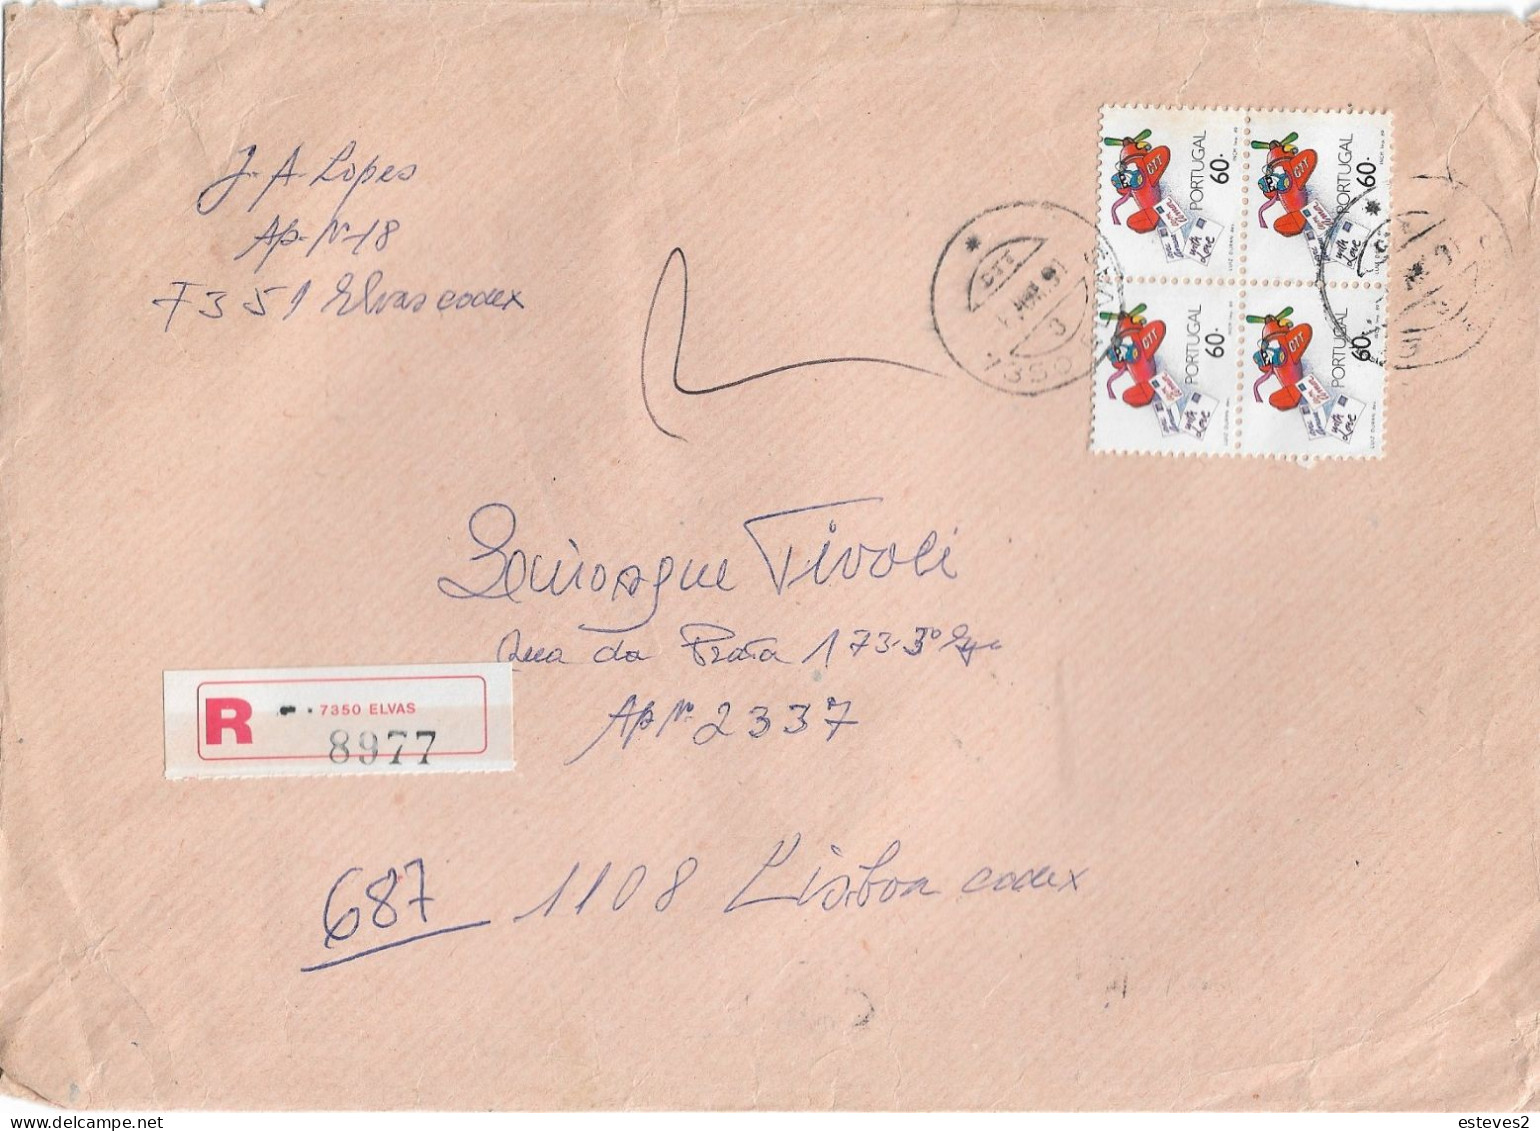 Portugal 1989  , Postal Services , Greetings Stamps ,  Aircraft , Aviation , Elvas Registation Label , Wax Stamps - Correo Postal